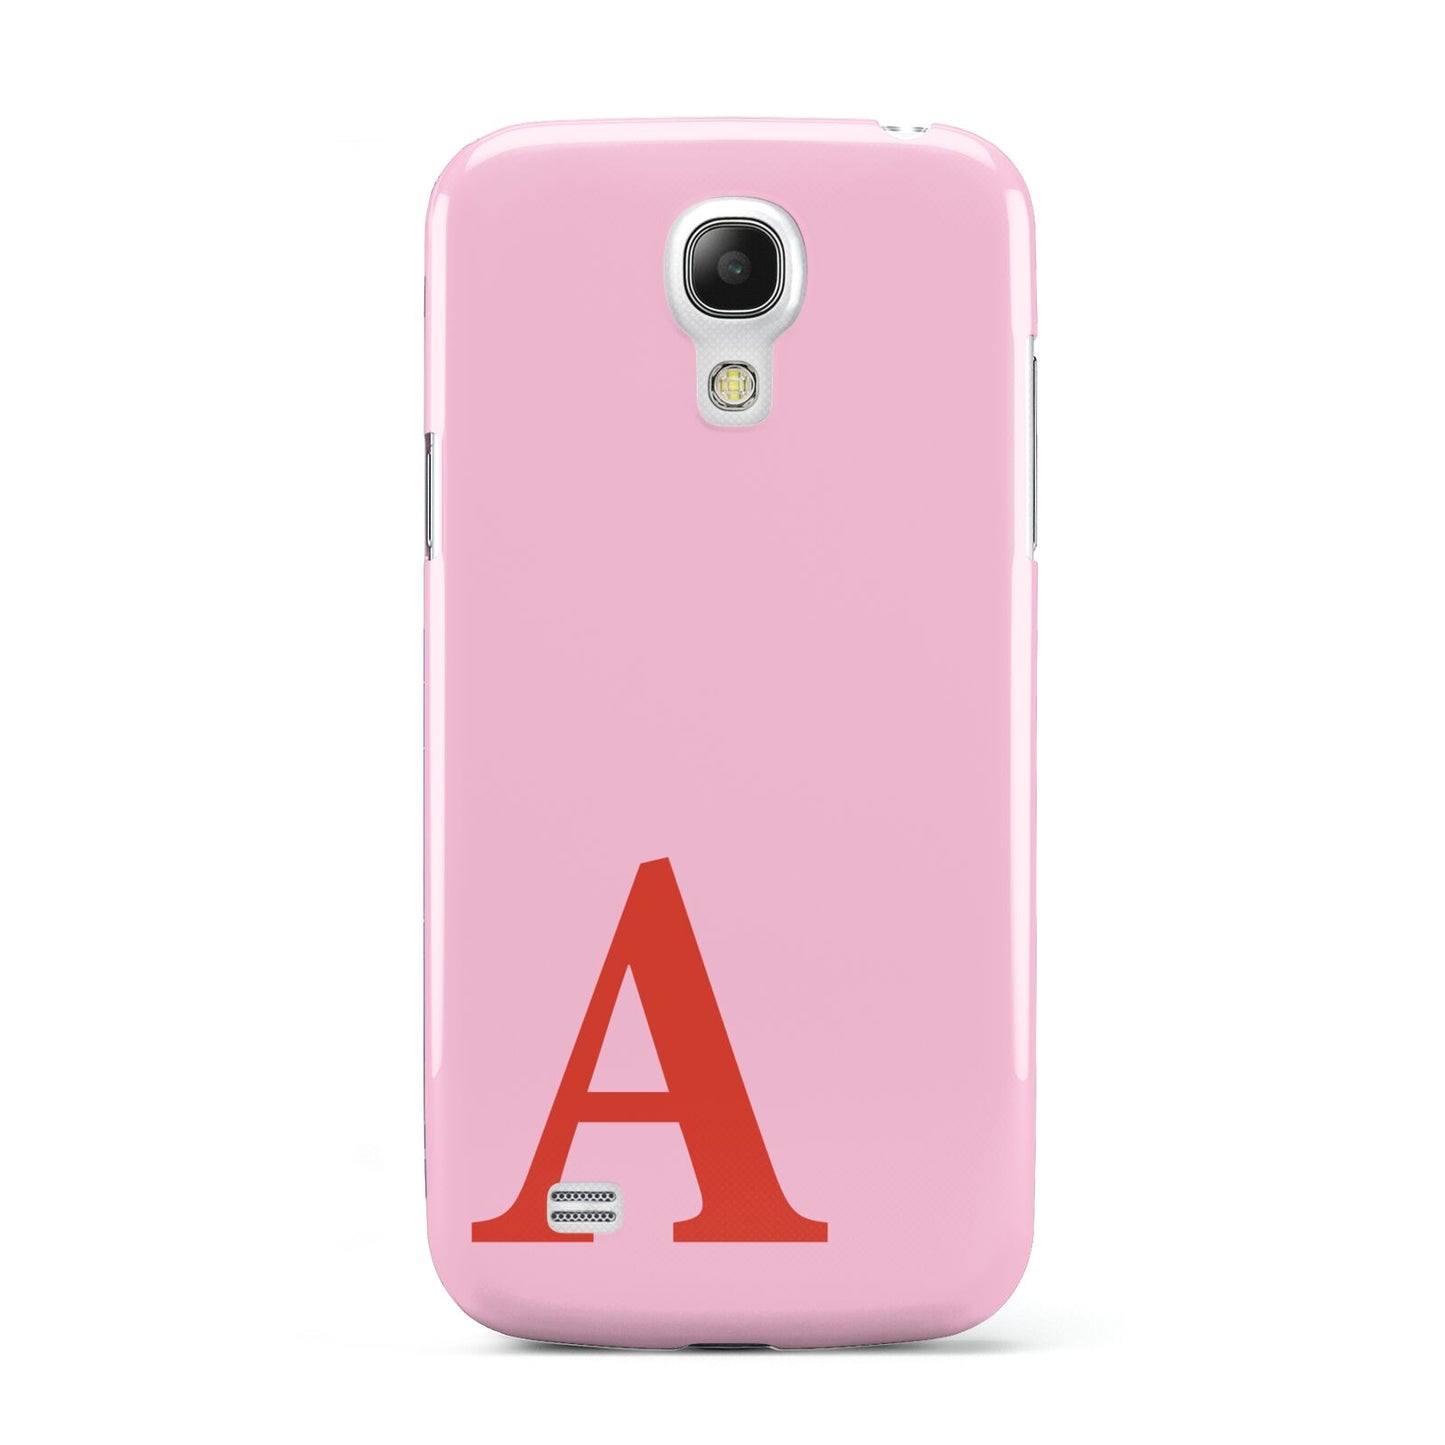 Personalised Pink and Red Samsung Galaxy S4 Mini Case